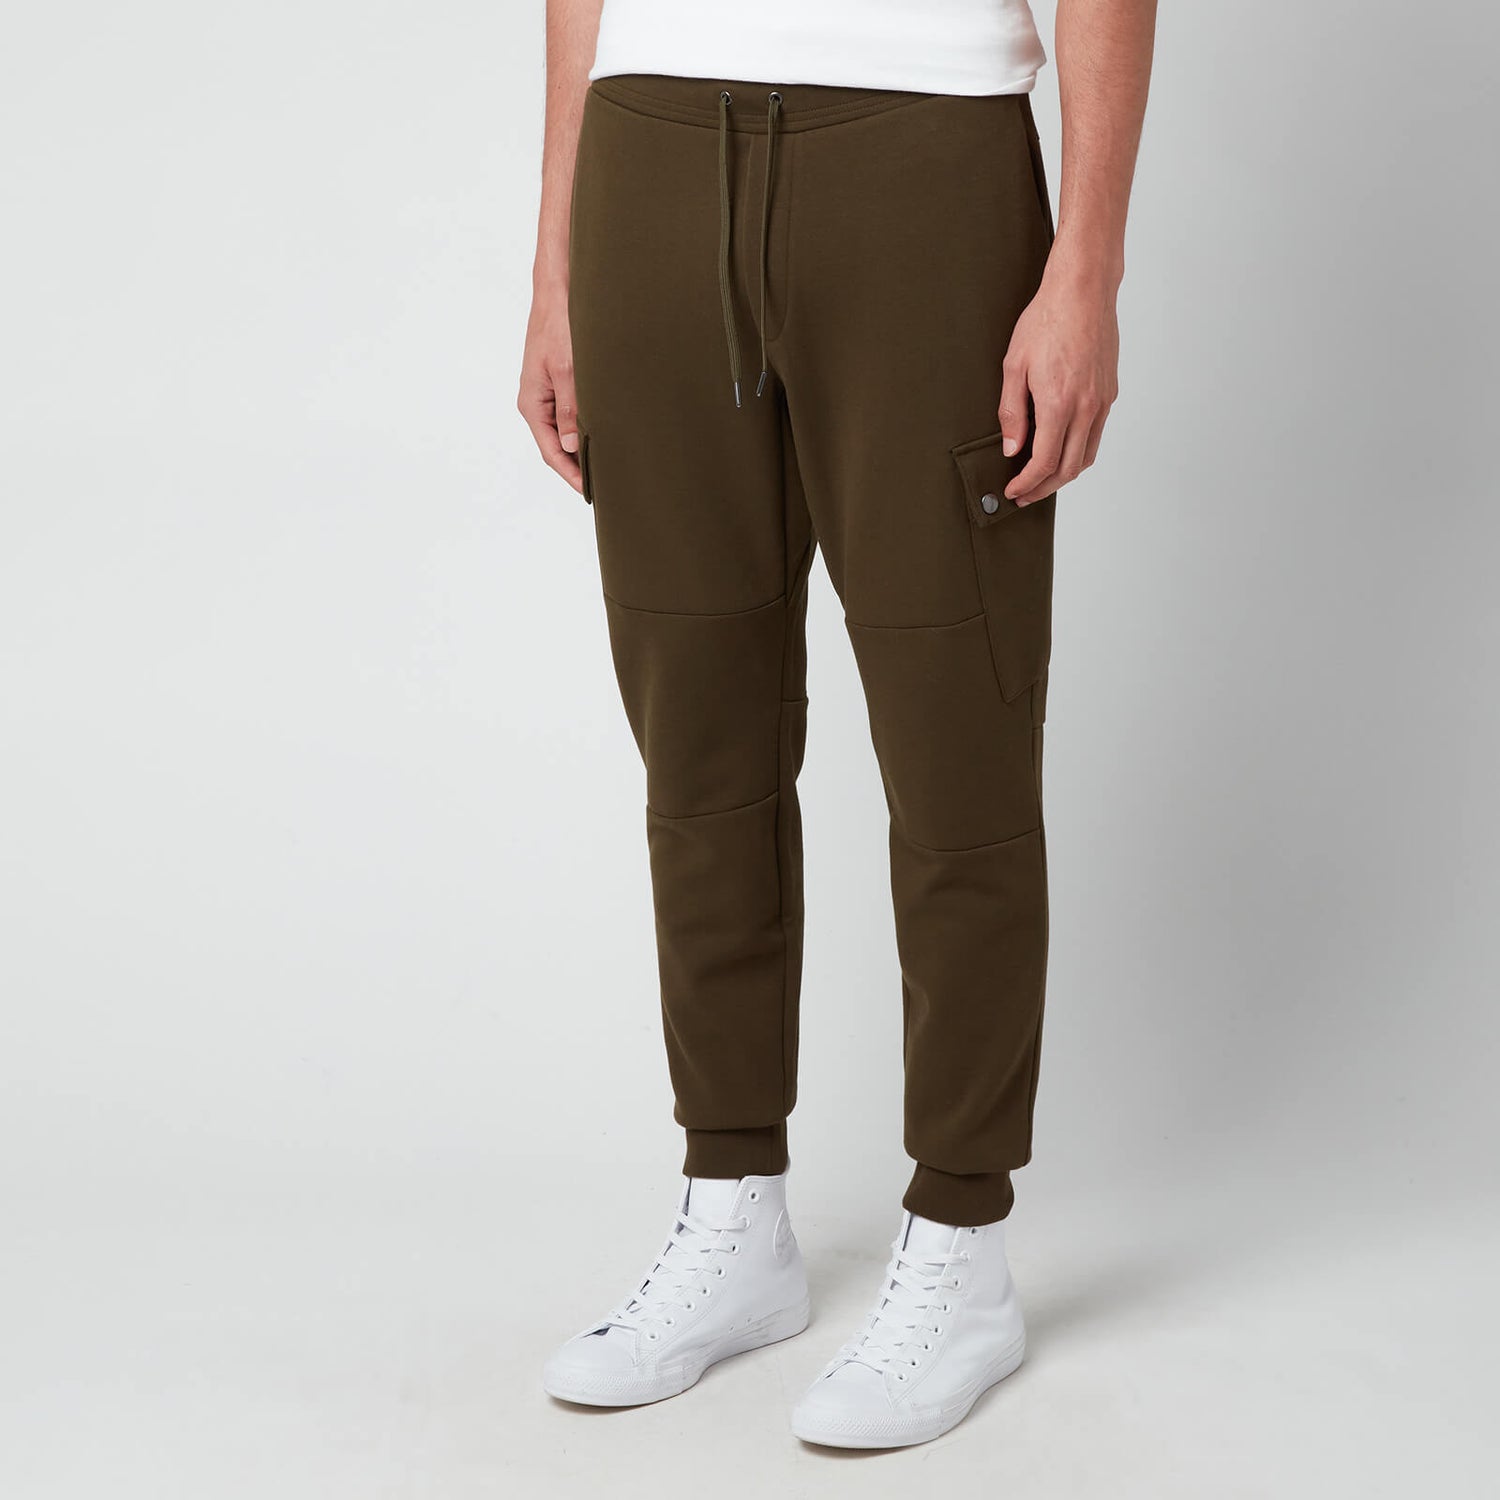 Polo Ralph Lauren Men's Double Knit Cargo Jogger Trousers - Company Olive - S